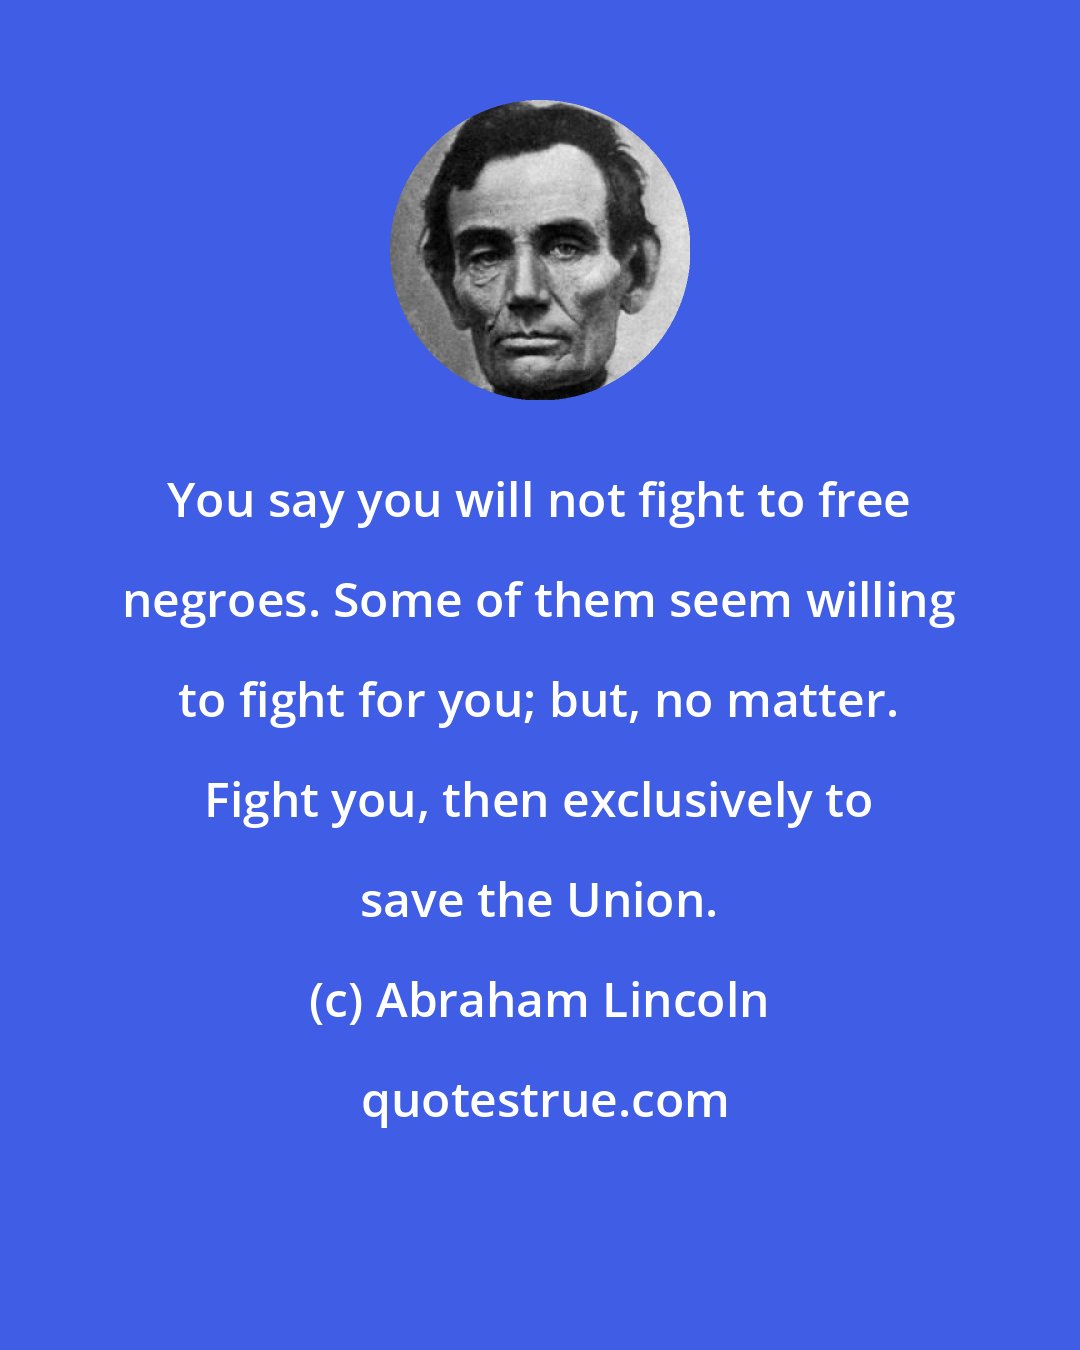 Abraham Lincoln: You say you will not fight to free negroes. Some of them seem willing to fight for you; but, no matter. Fight you, then exclusively to save the Union.